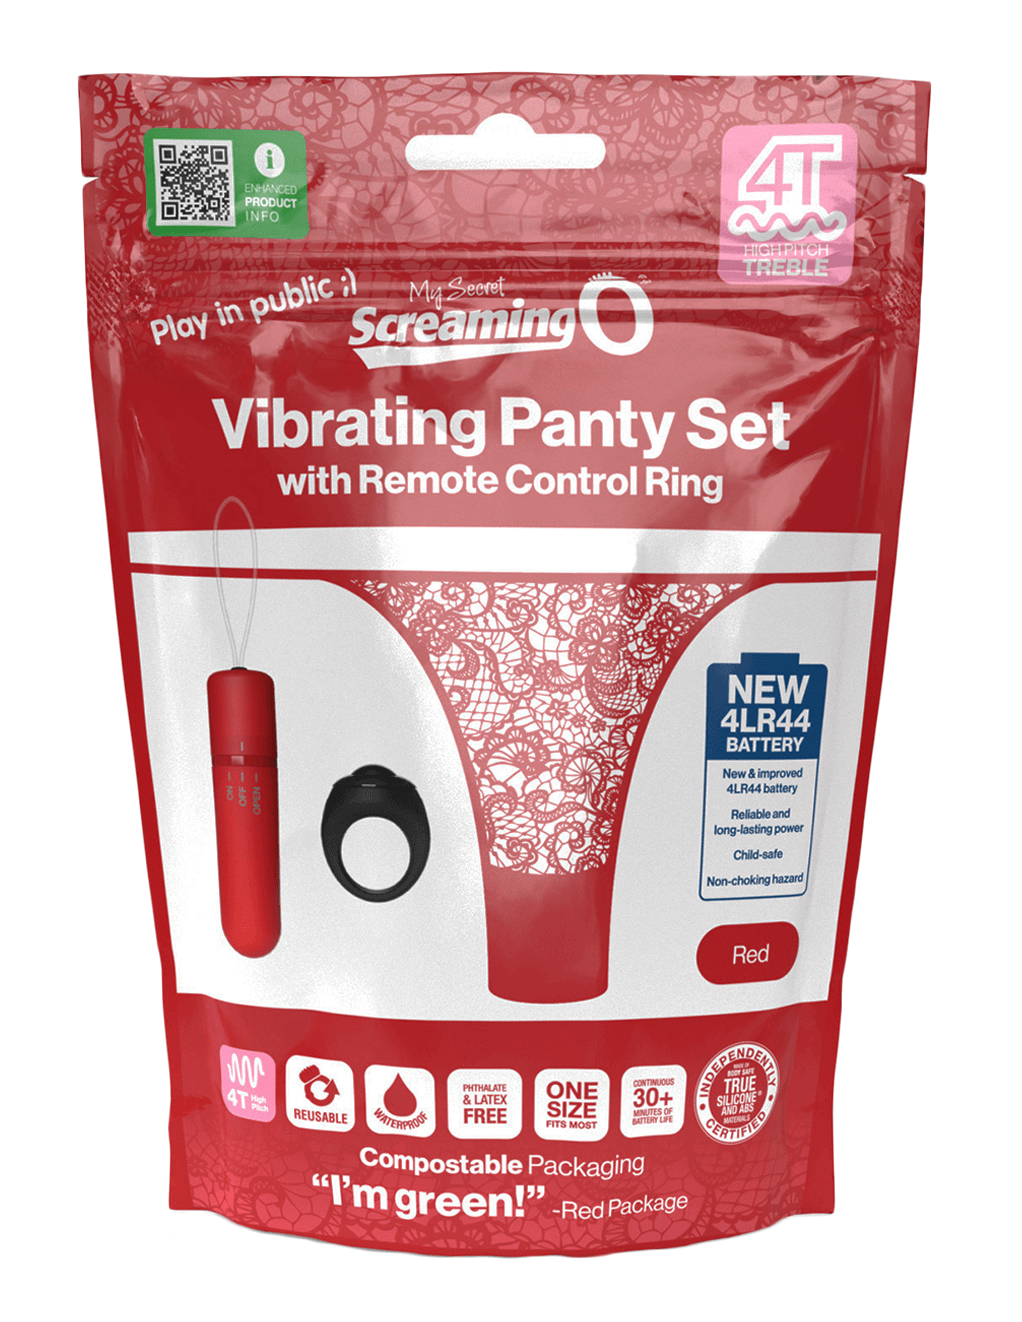 Screaming O 4T Vibrating Panty - Red - Packaging